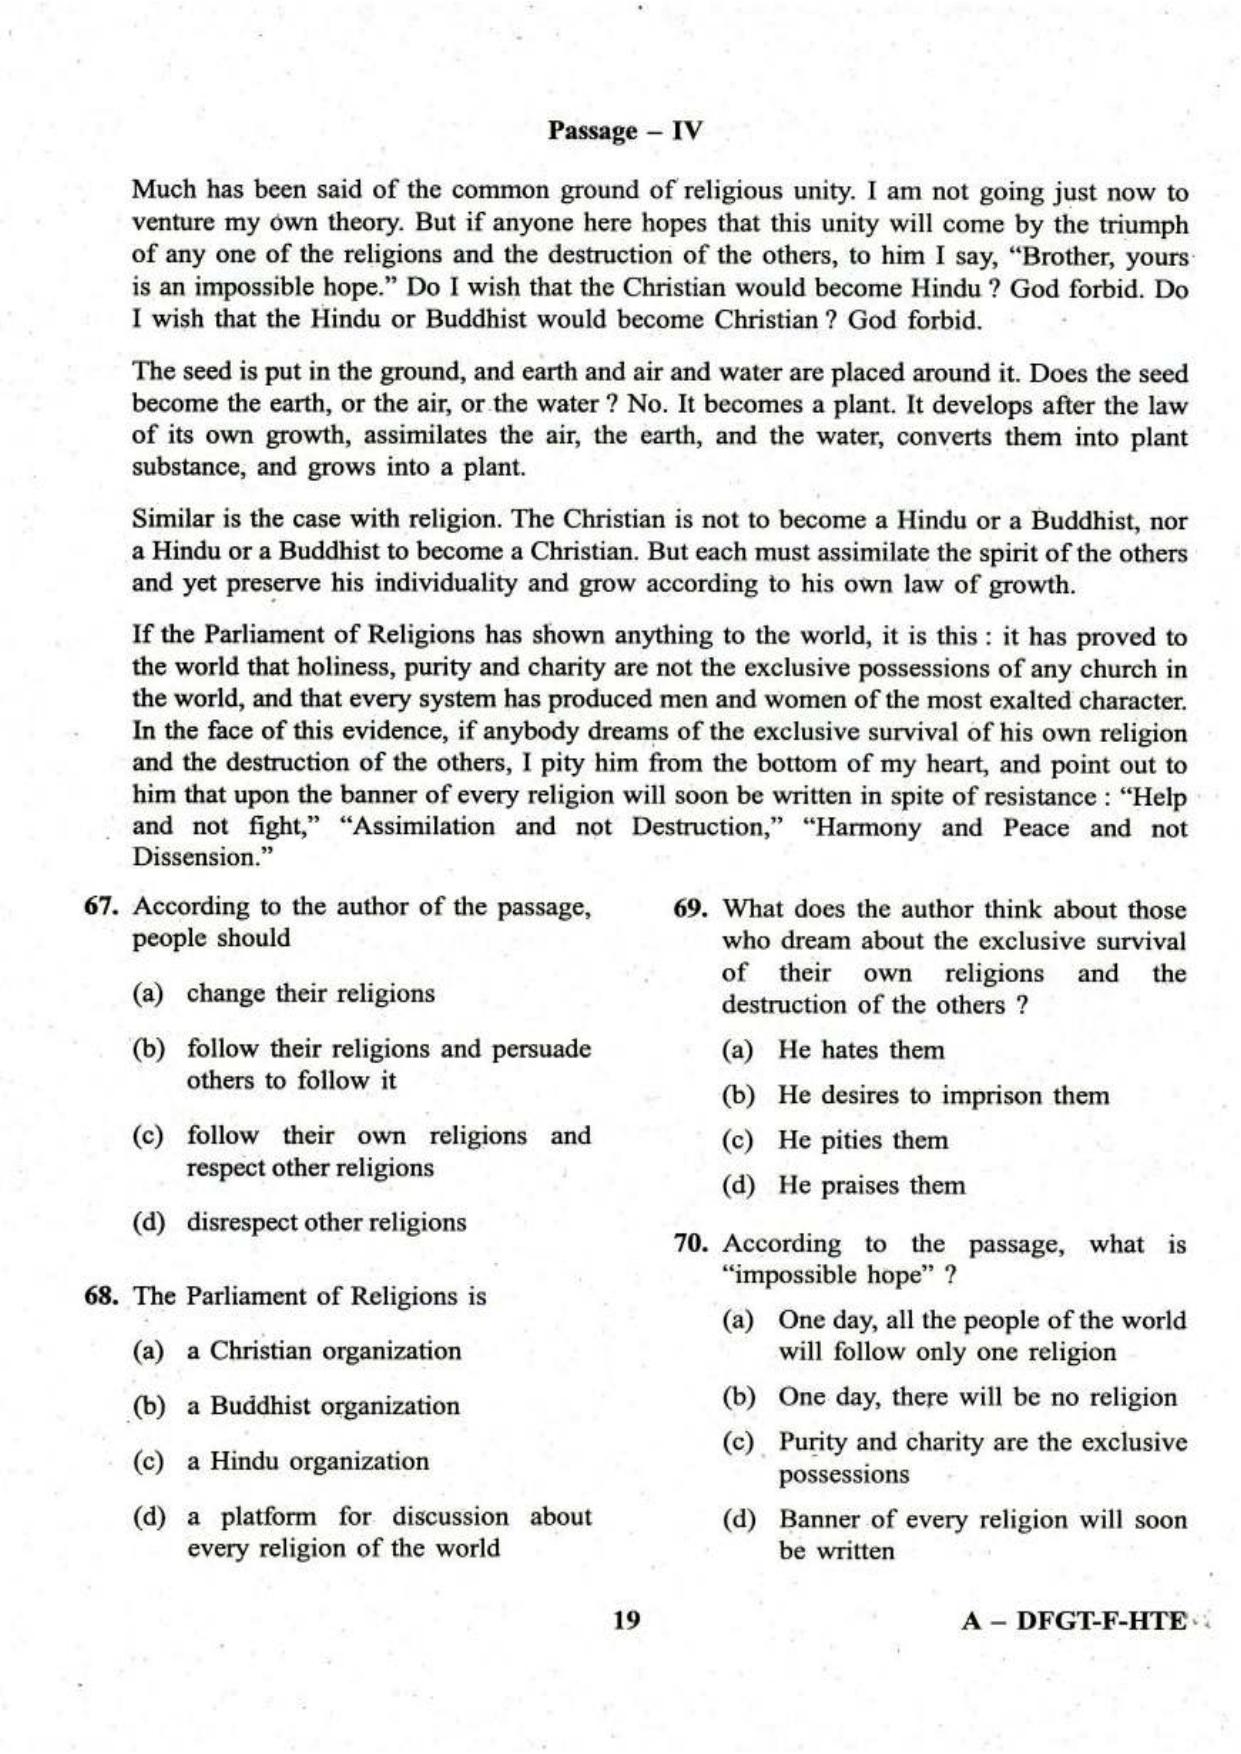 PBSSD General English Old Papers For BLS, PADEO, SPDM, and DPM - Page 19